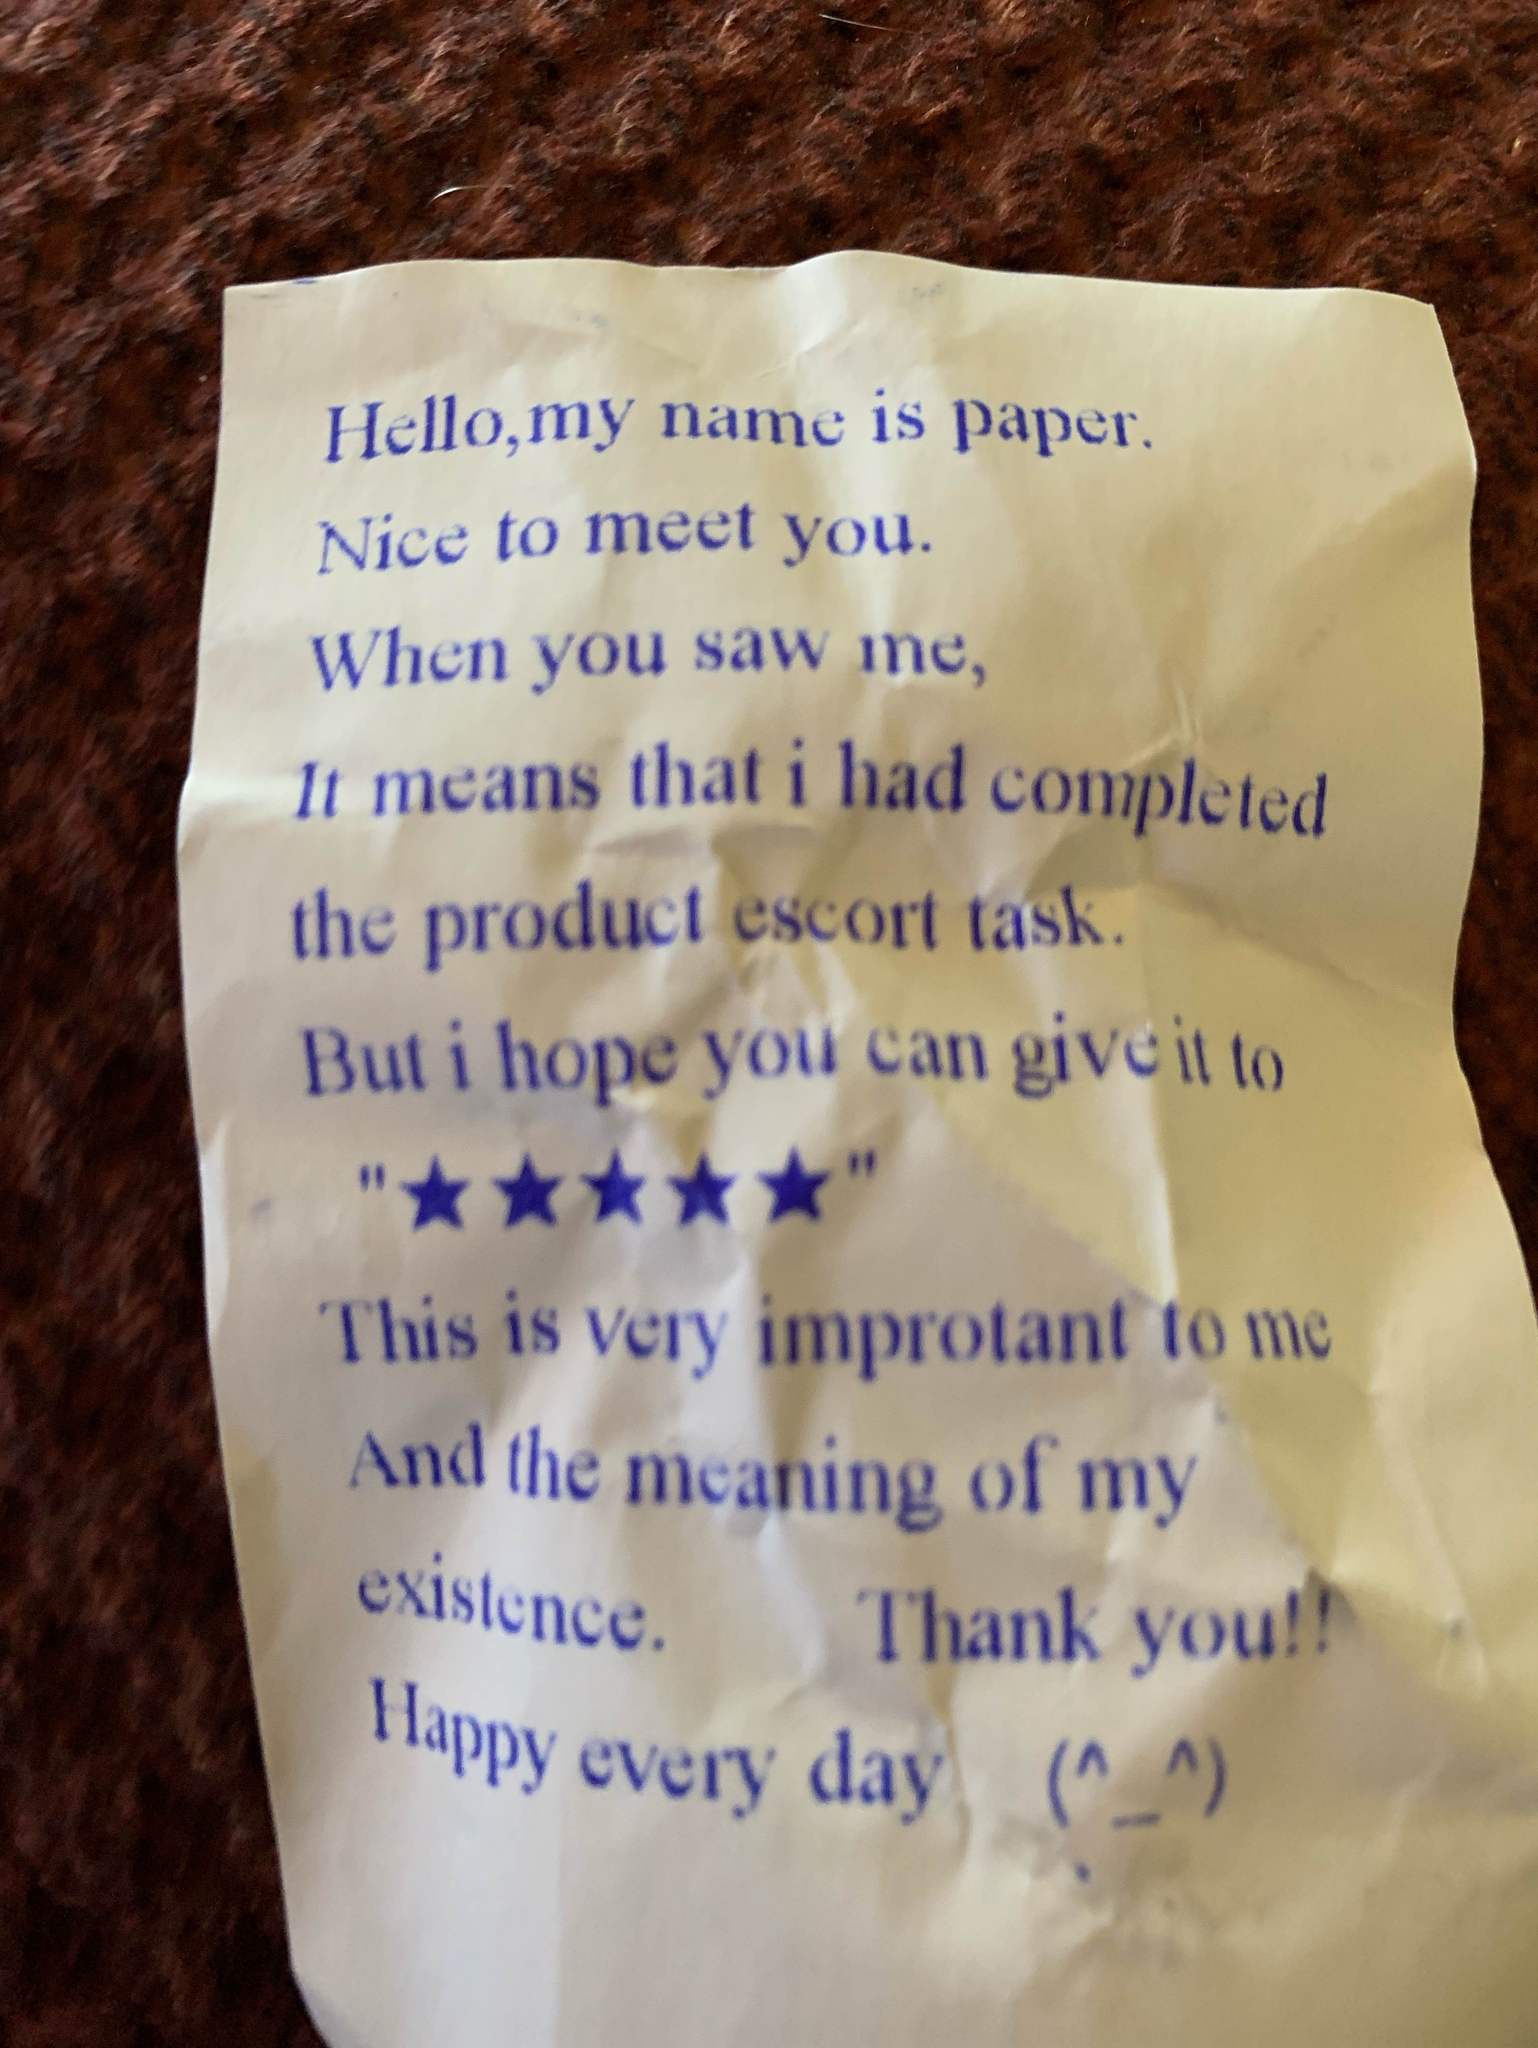 Ordered something from China, this came attached.  Wholesome Mr. Paper. - meme